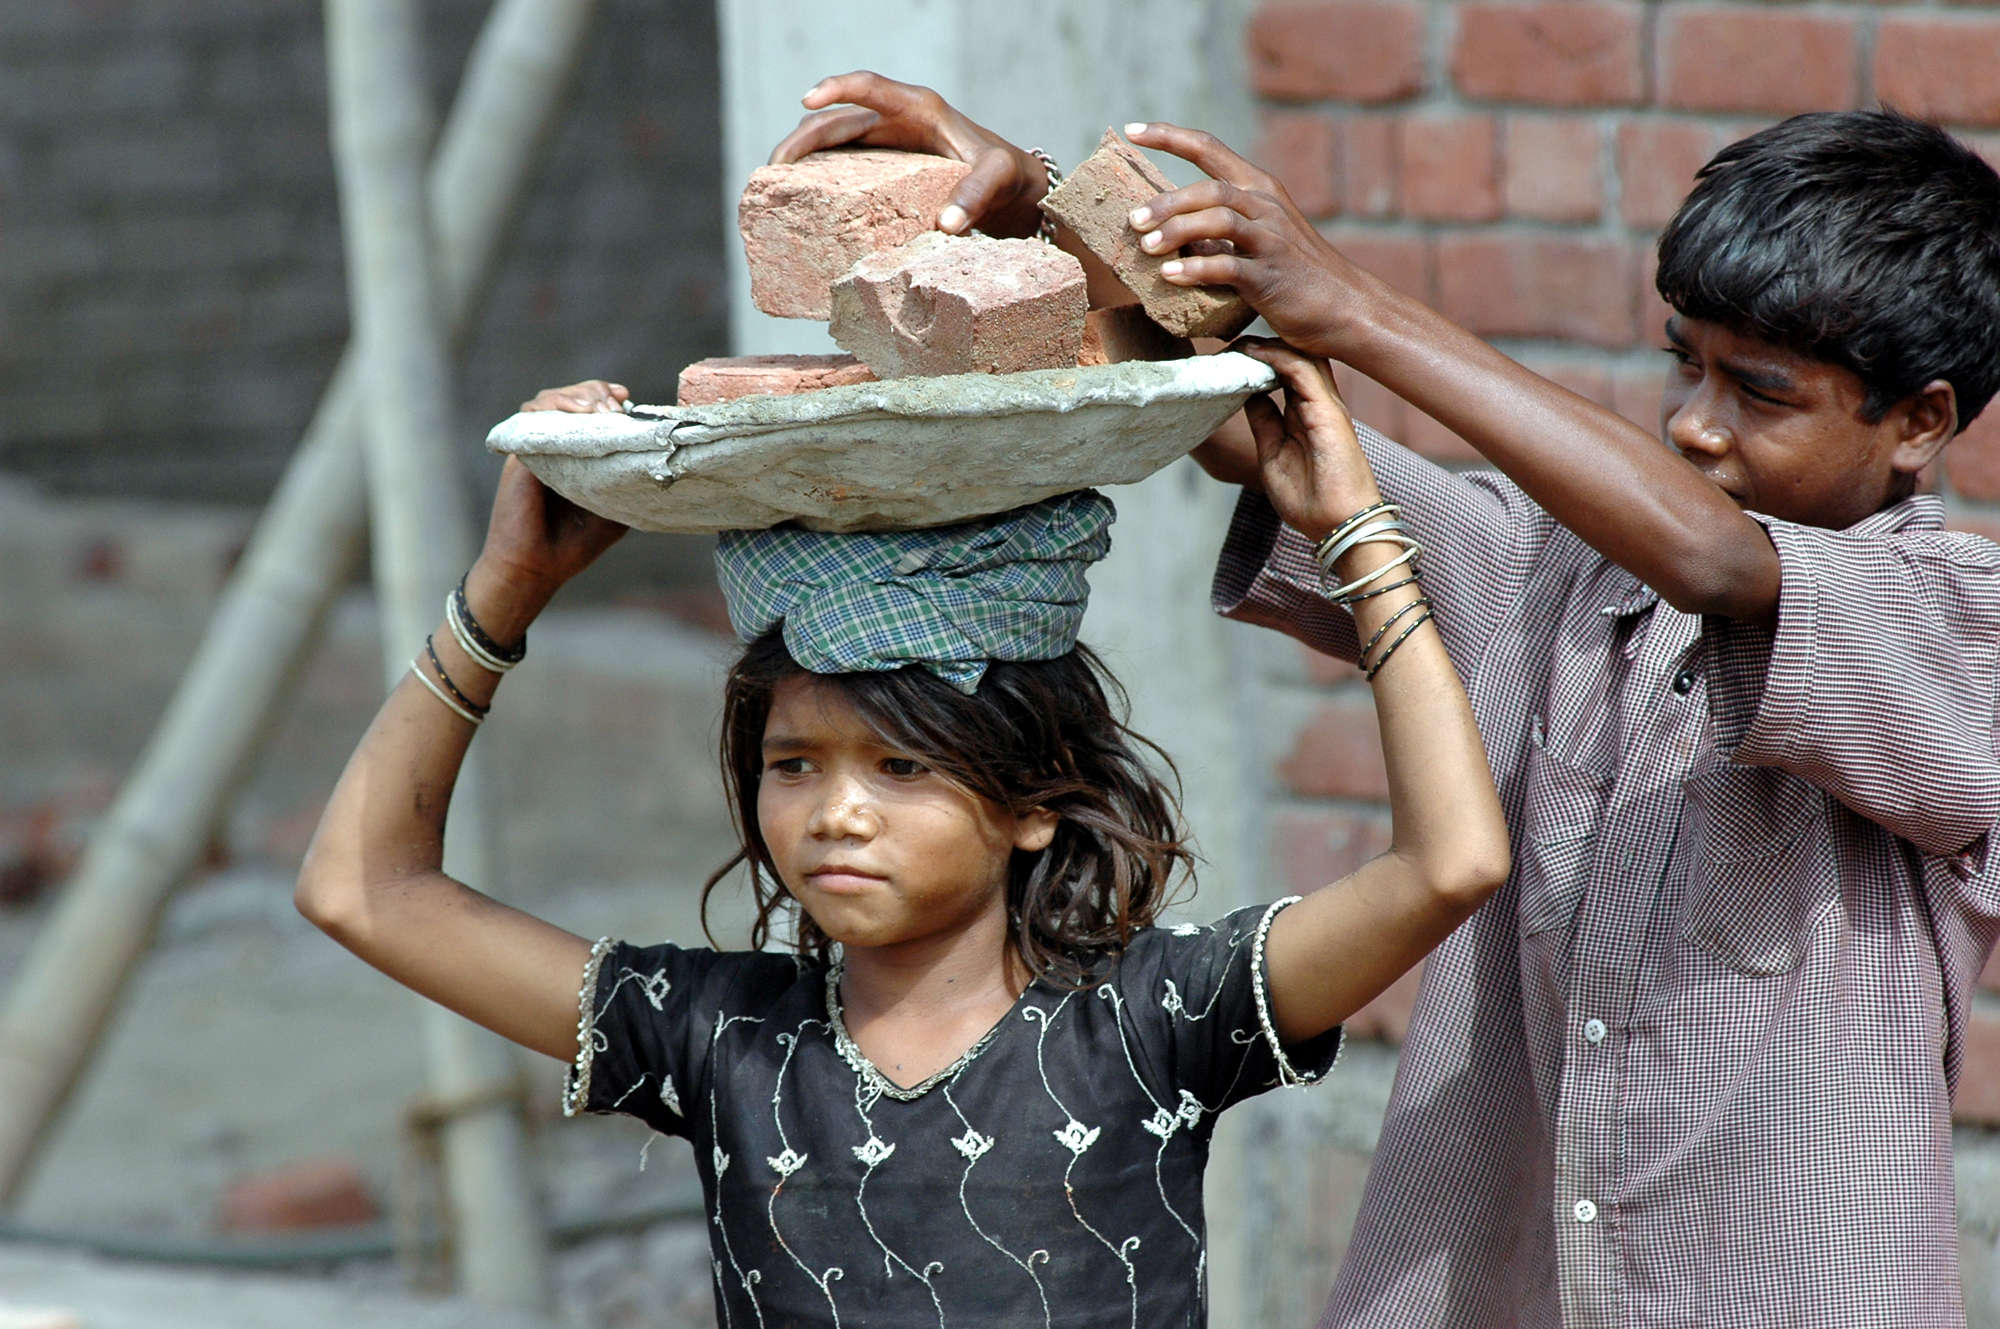 Stop enslavement of our children: Despite laws criminalising it, child labour and trafficking continue apace